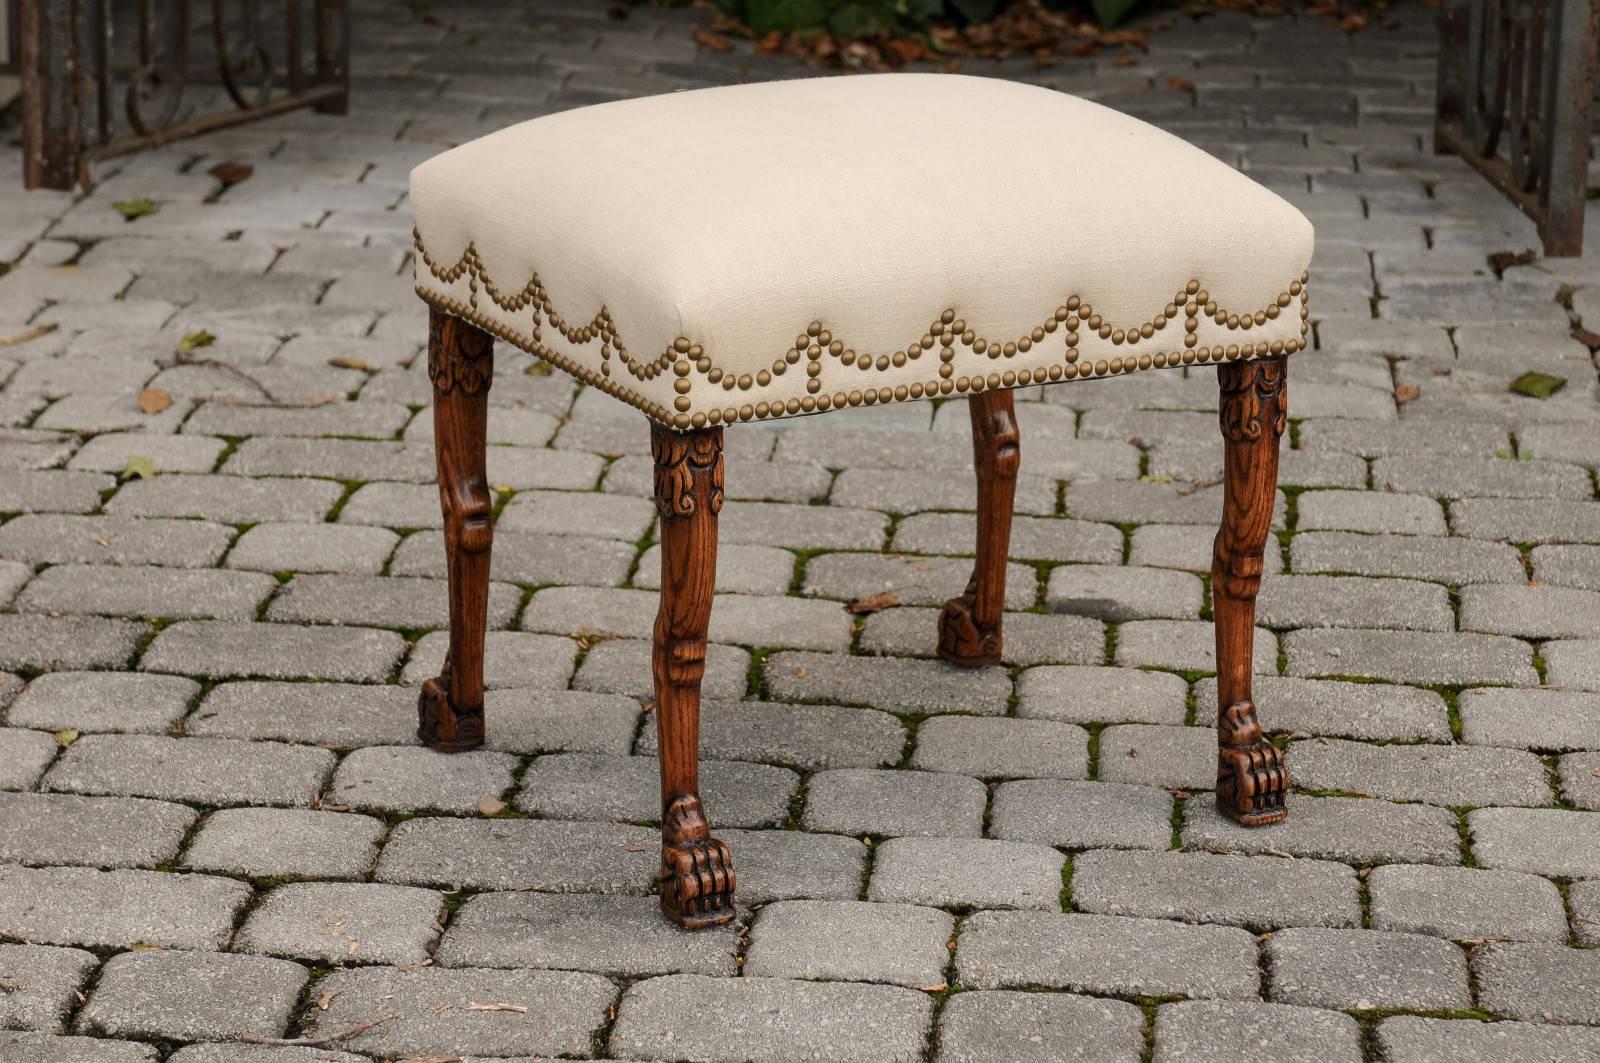 An English carved oak stool reupholstered in linen with lion paw feet from the late 19th century. This English oak stool features a rectangular seat, covered in linen with brass nailheads. The eye is immediately drawn to the unusual pattern created